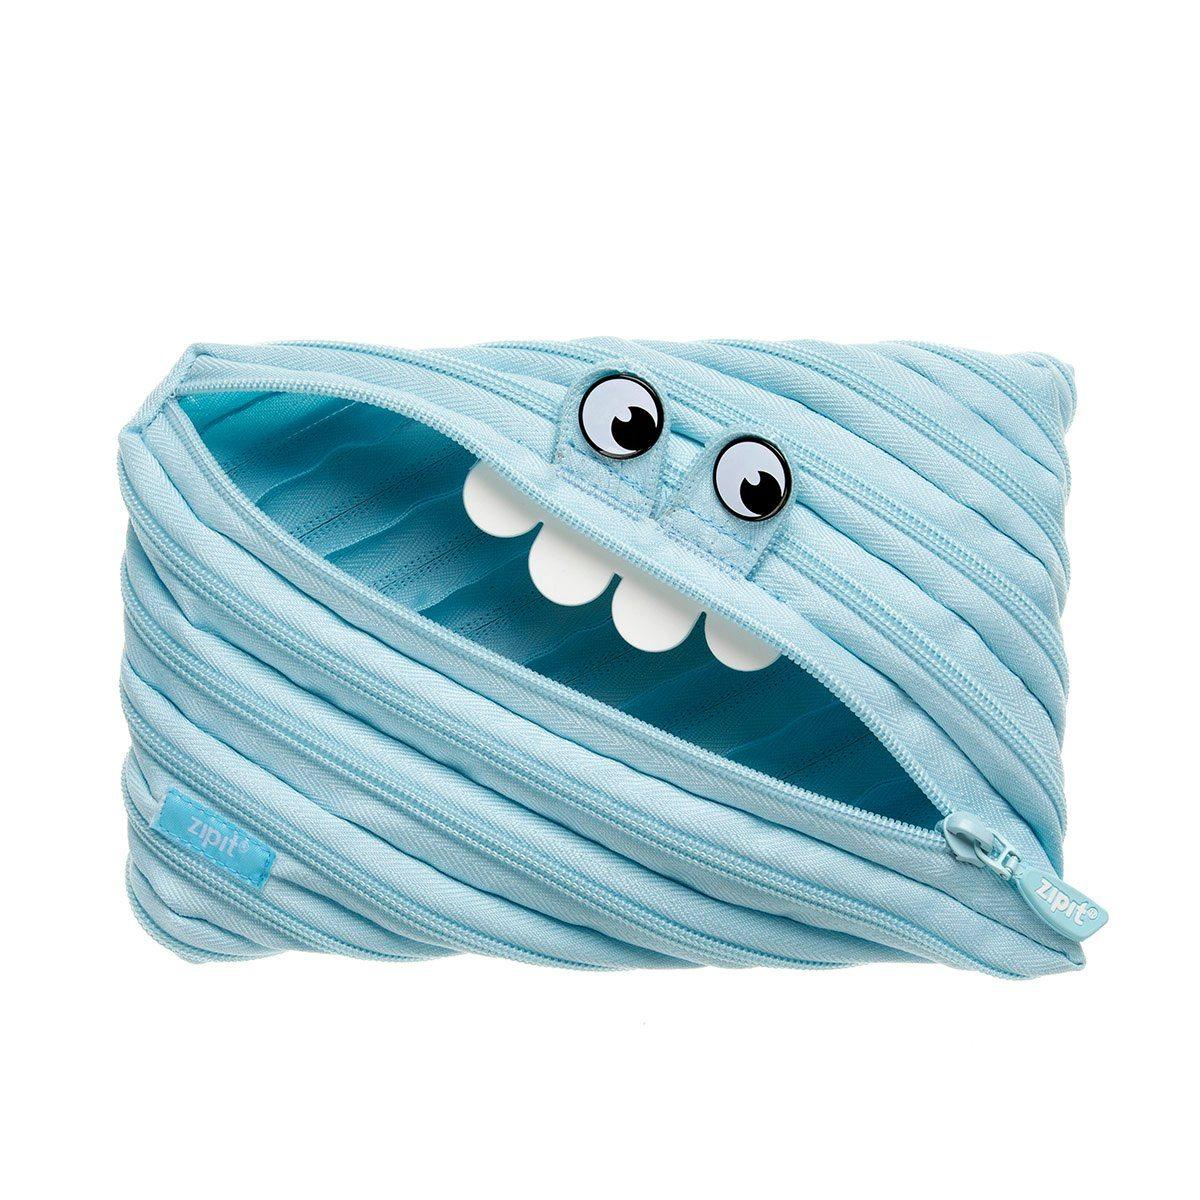 Zipit Gorge Monster Pencil Case, Boys Pencil Pouch, Large Capacity, Made Of One Long Zipper!